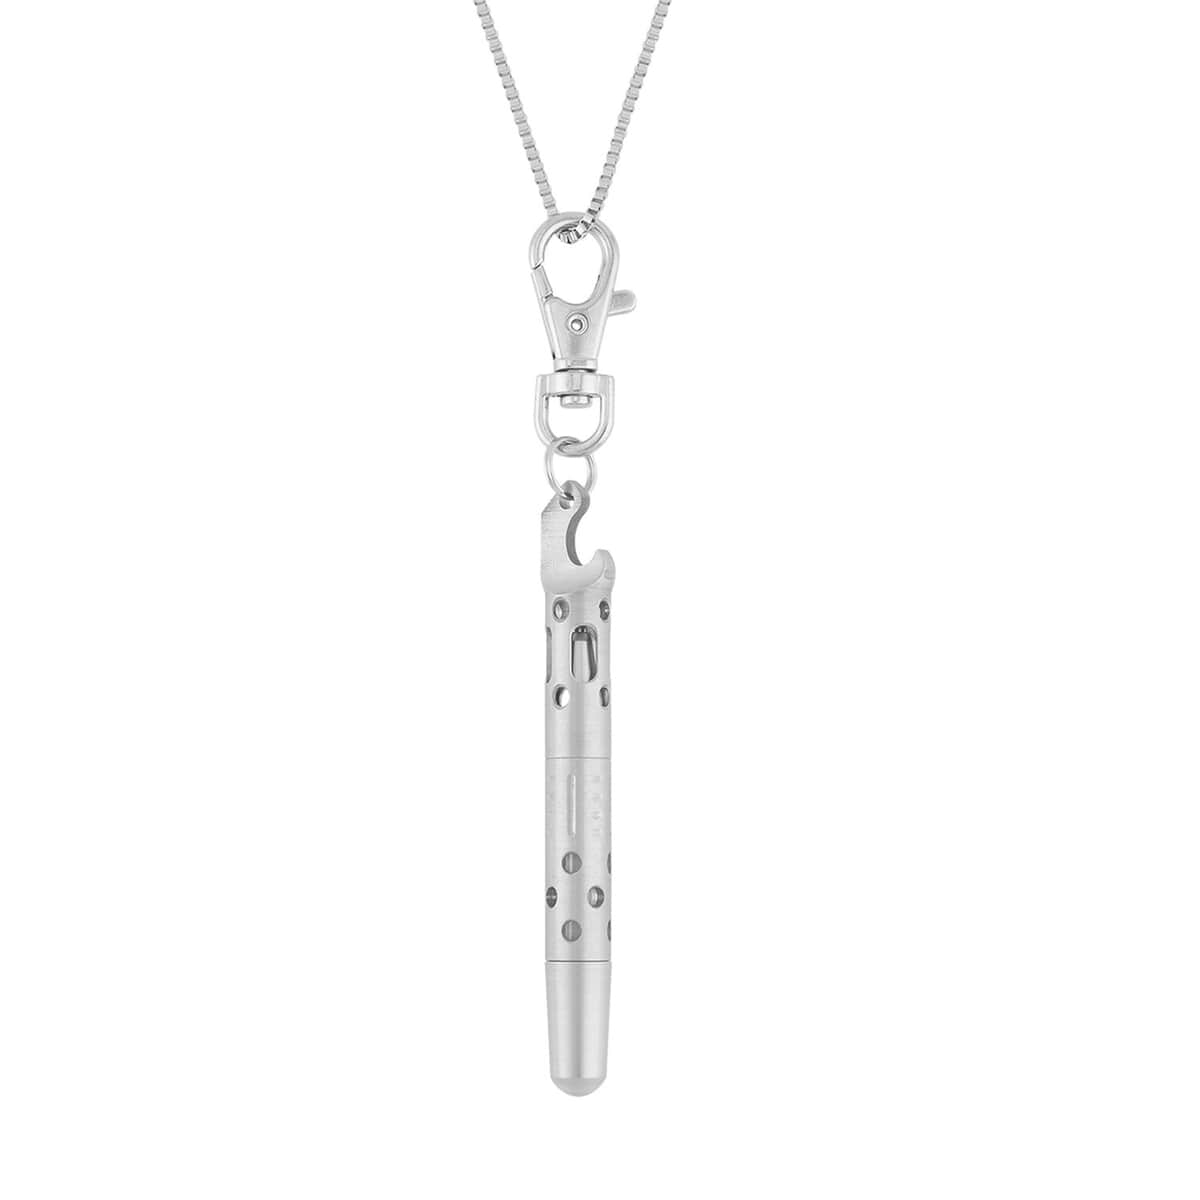 Multi-function Key Chain Pendant Necklace (30-32 Inches) in Stainless Steel , Tarnish-Free, Waterproof, Sweat Proof Jewelry image number 0